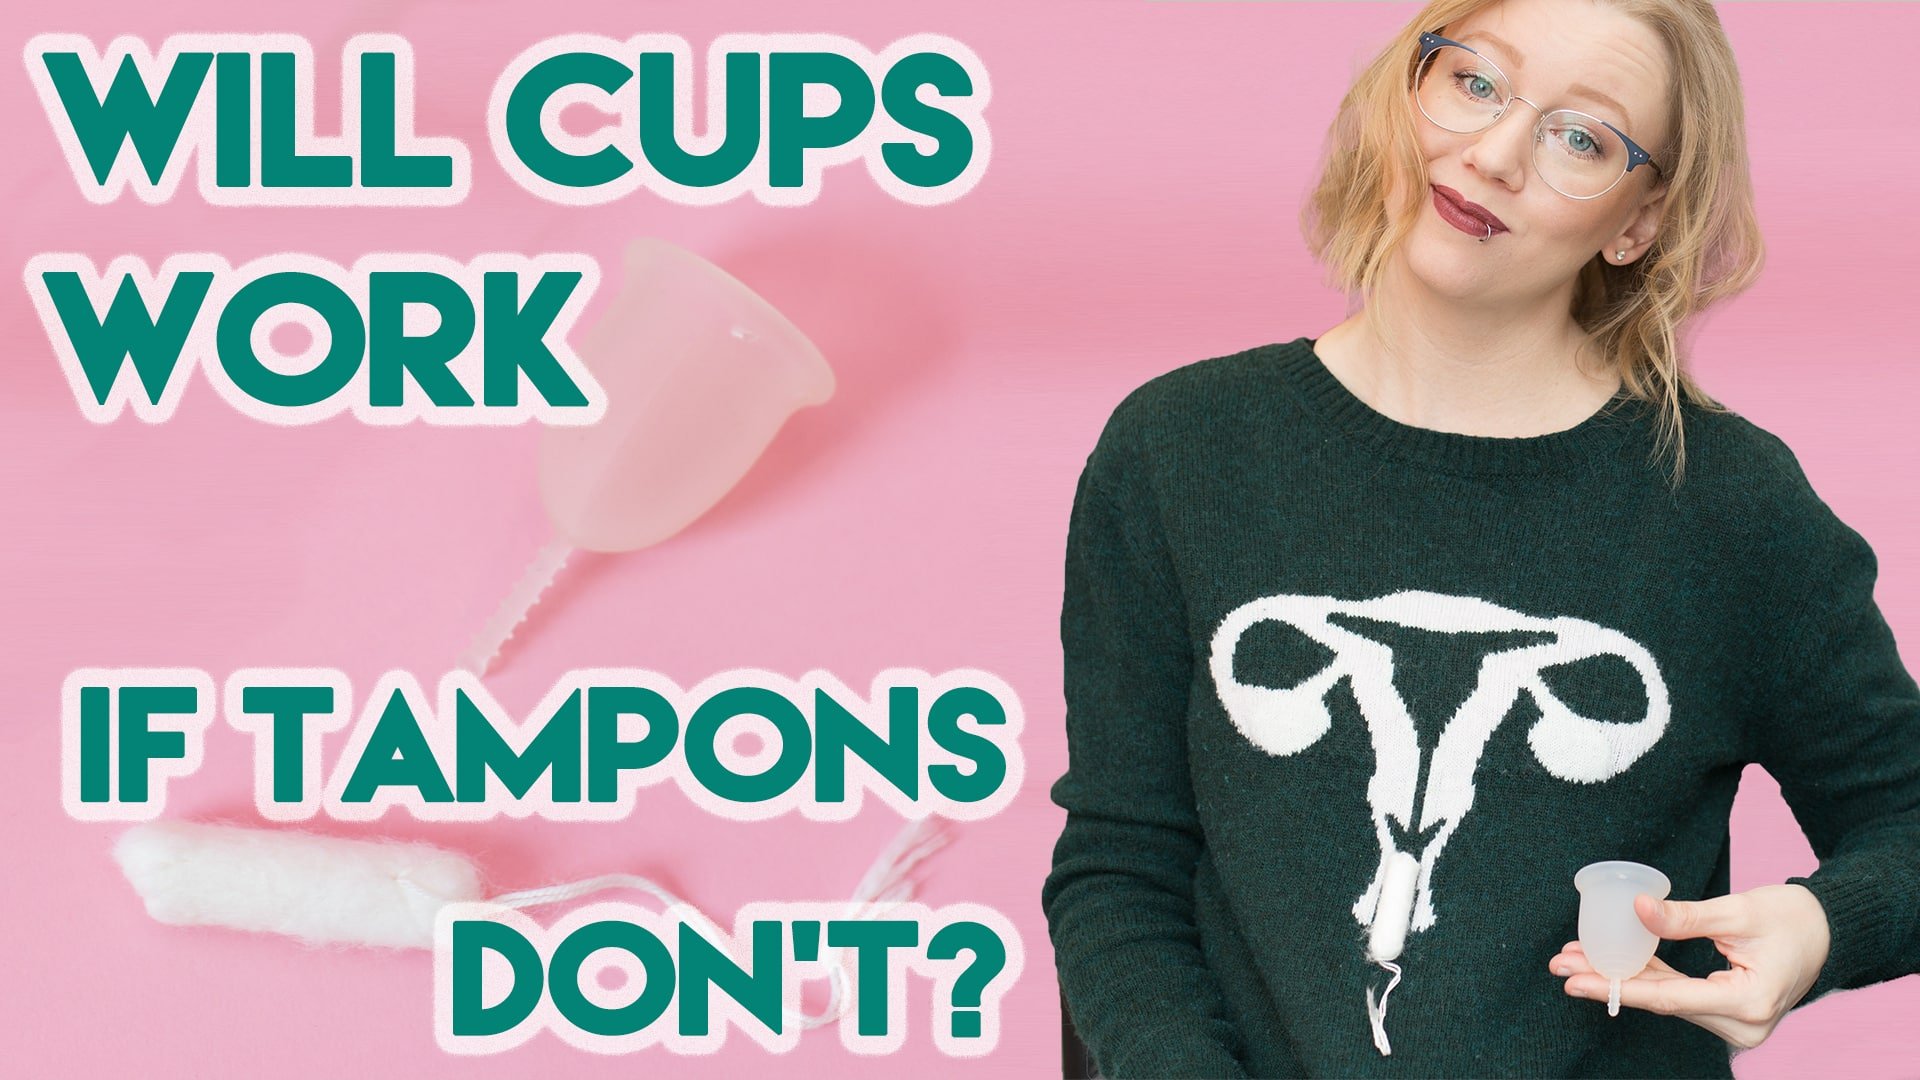 Will Menstrual Cups Work If Tampons Dont? Yes!